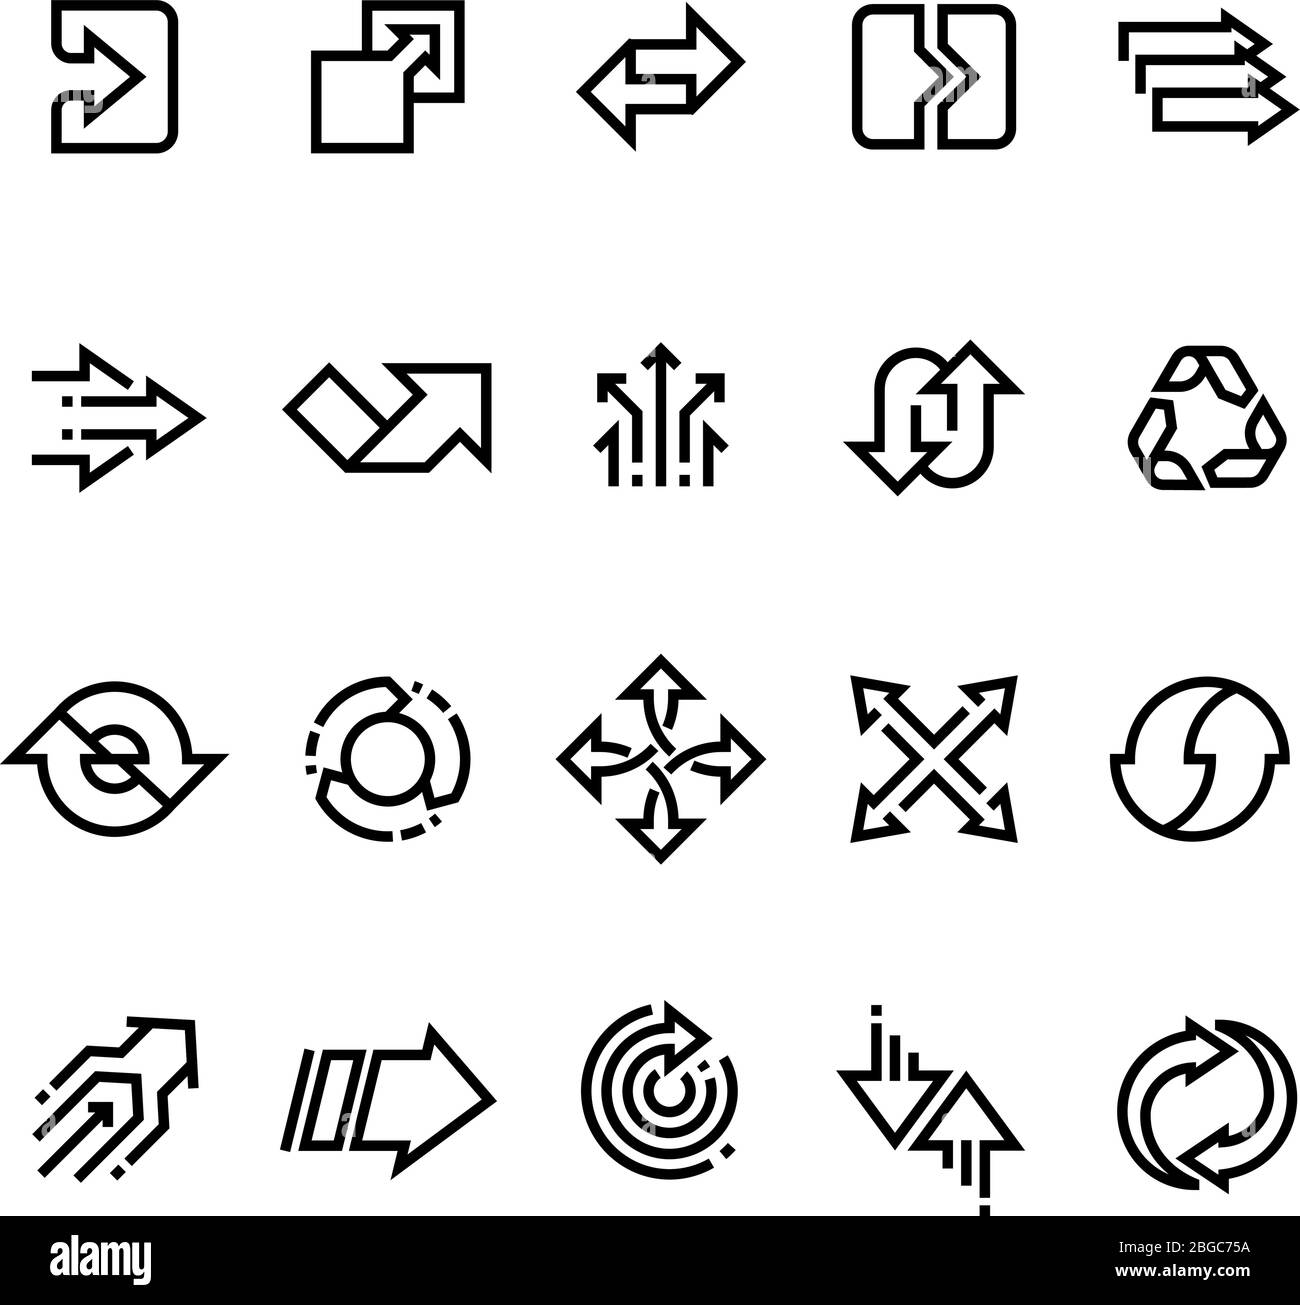 https://c8.alamy.com/comp/2BGC75A/transform-action-many-direction-arrows-line-vector-icons-simple-transition-outline-symbols-arrow-pointing-line-style-collection-2BGC75A.jpg